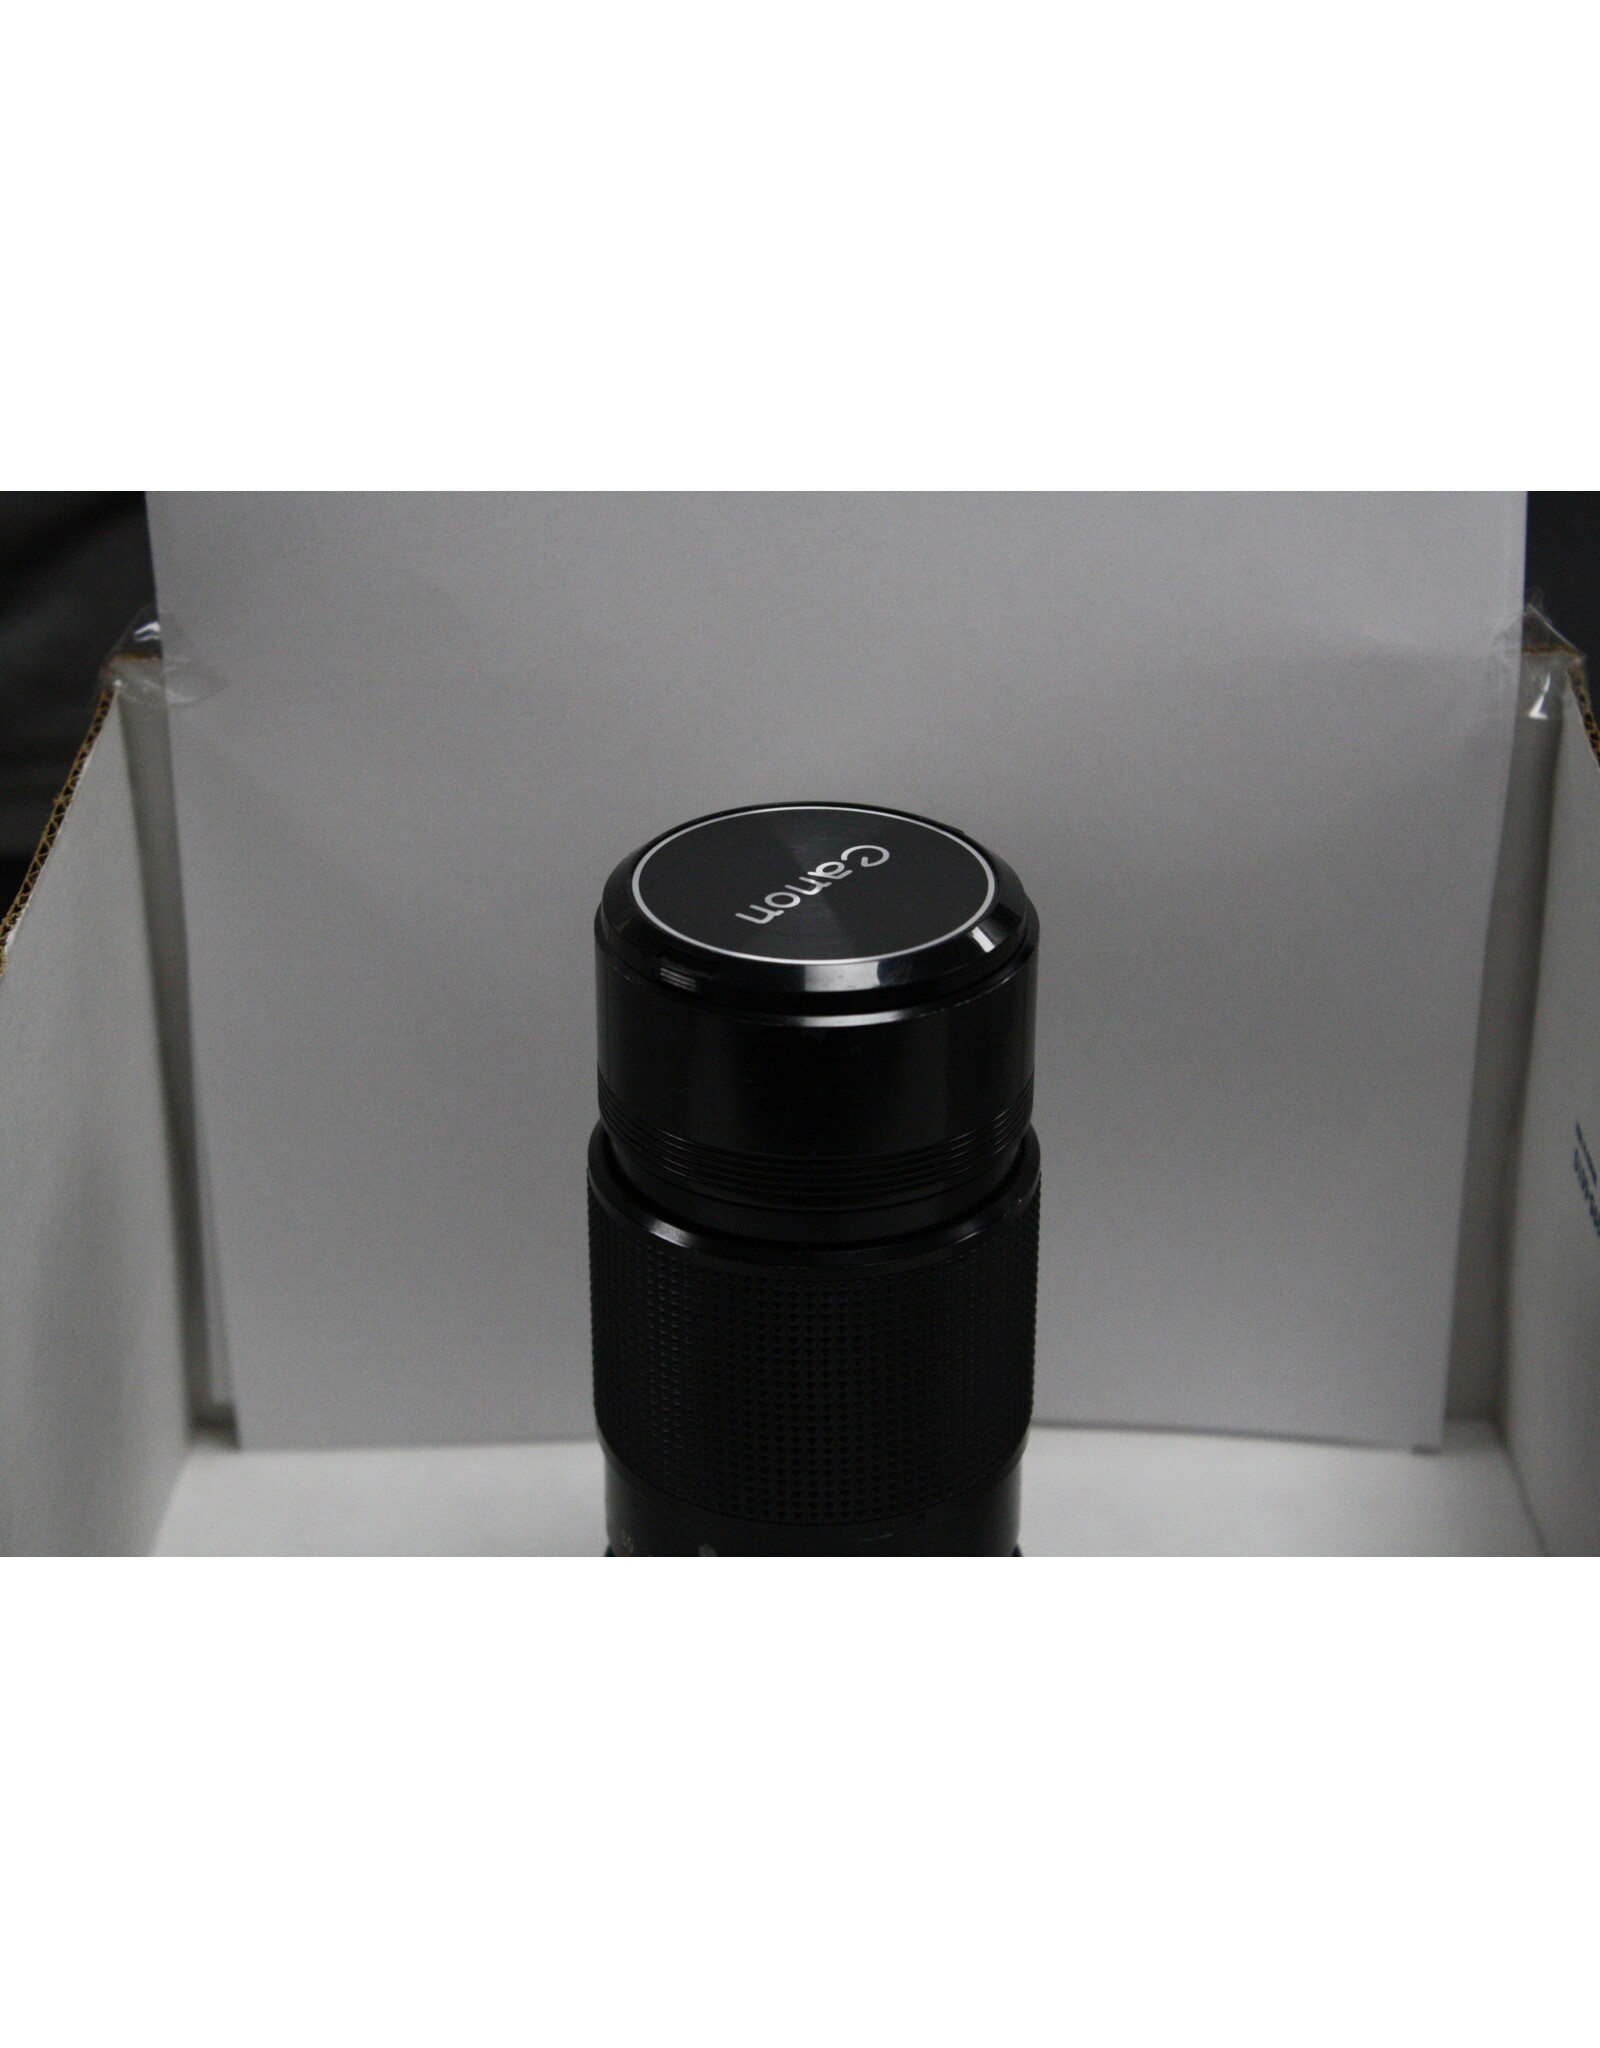 CANON LENS FD 200mm 1:4 s.s.c (Pre-owned)